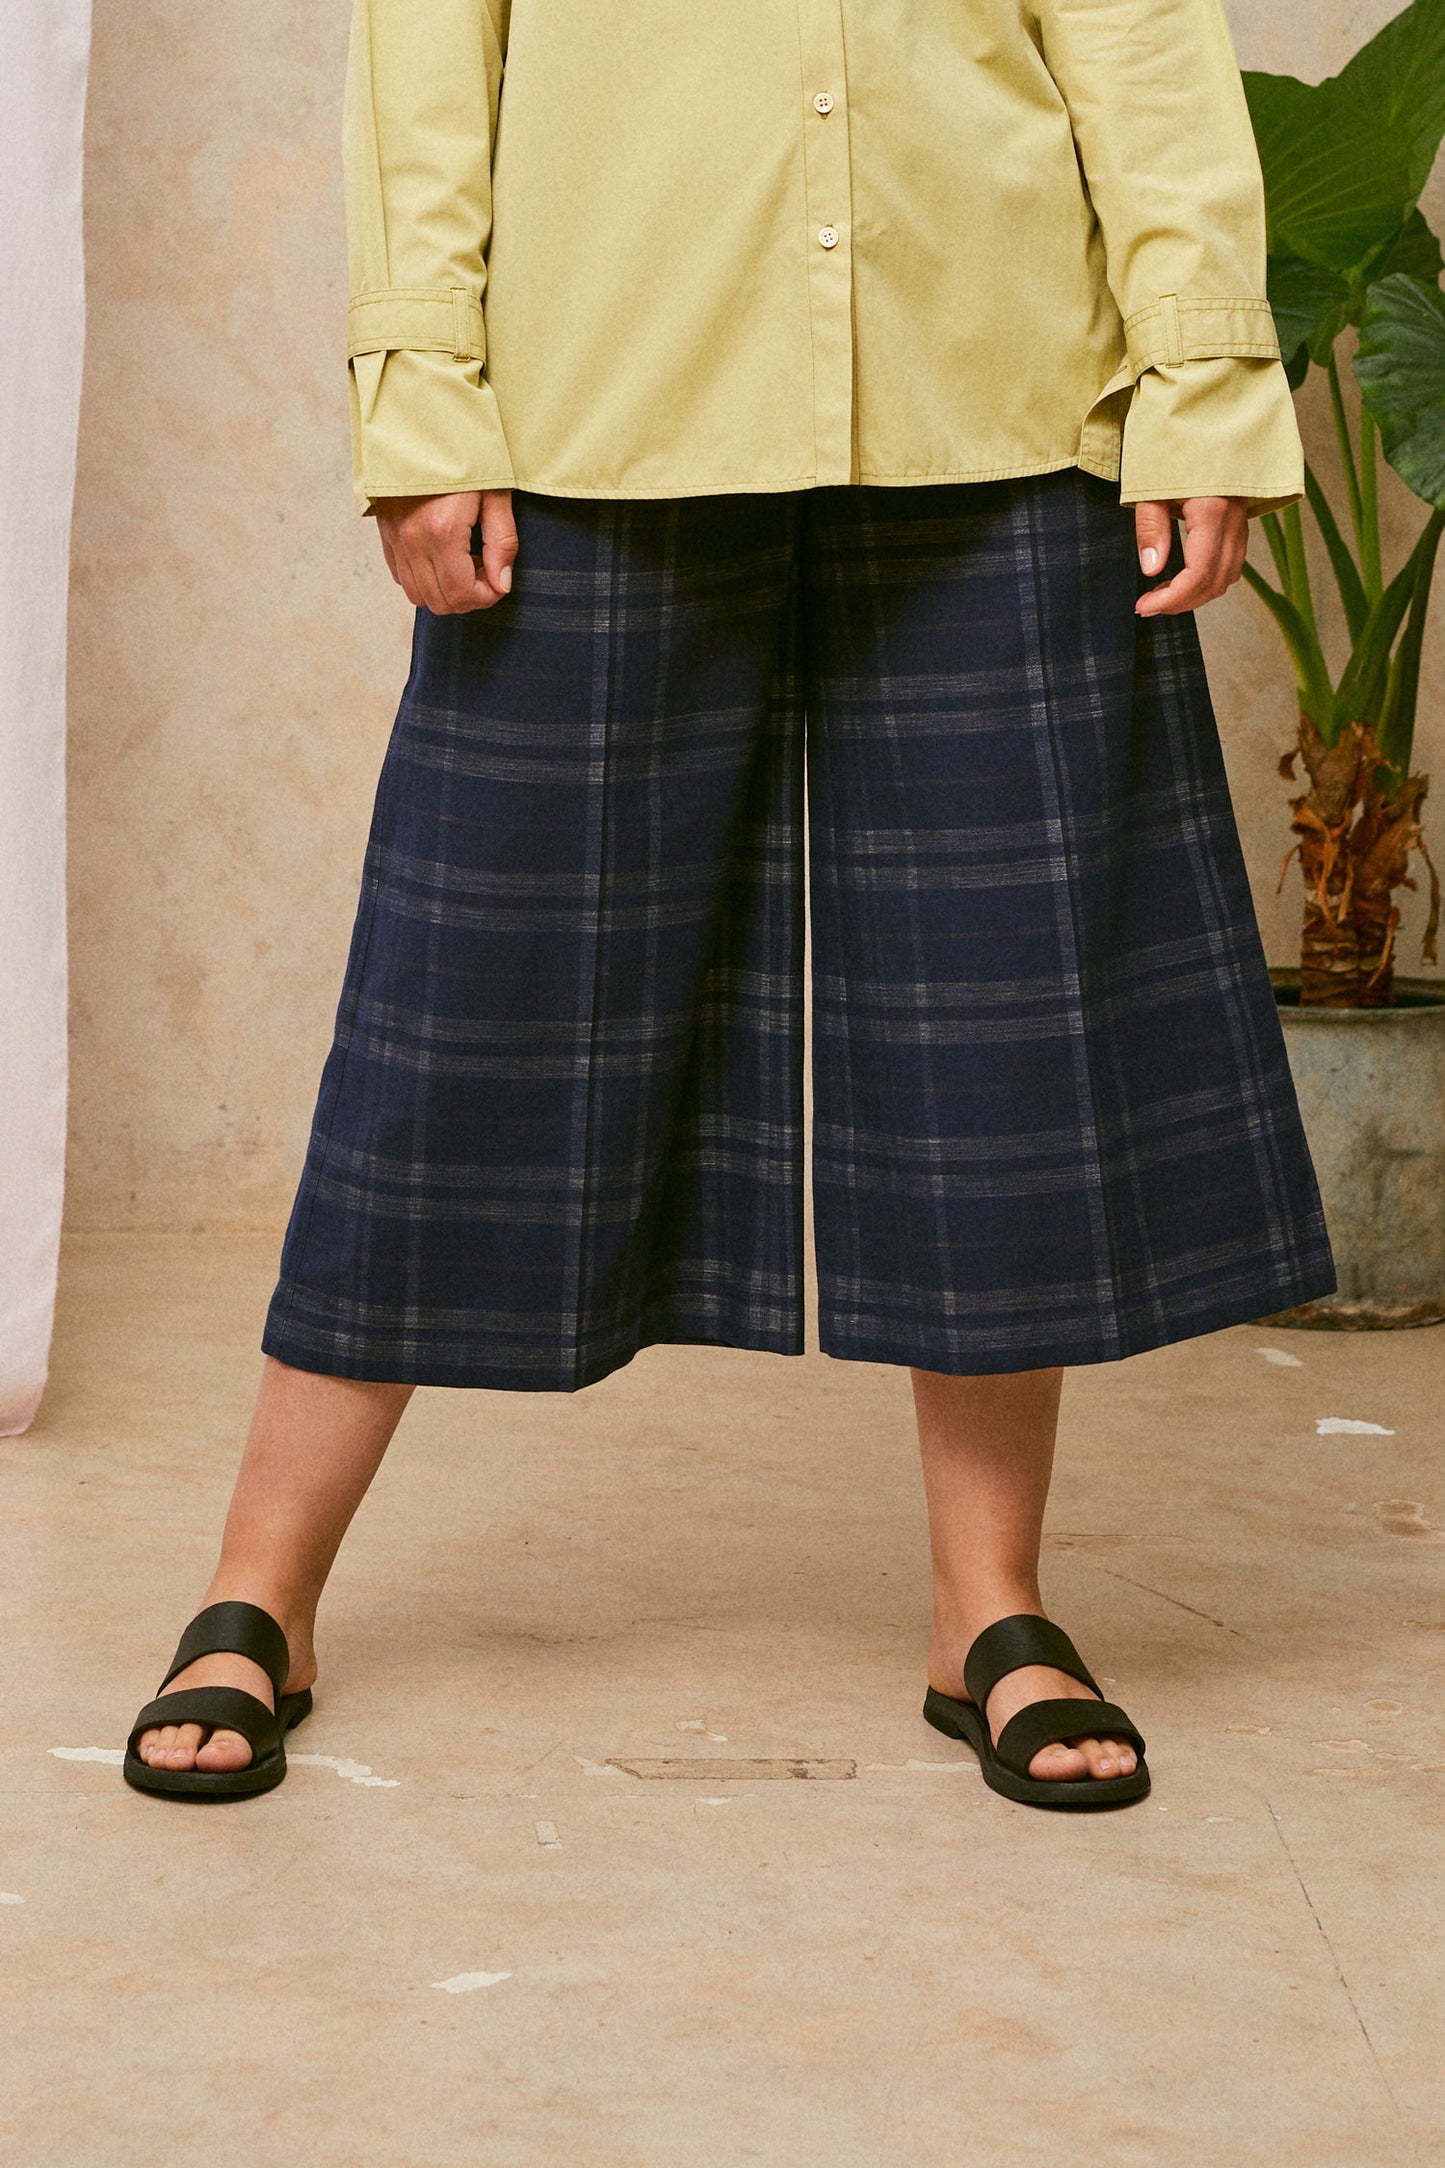 Close up of model wearing Saywood's Amelia check trousers, wide leg culotte shape in navy check, with black sandals. Worn with the olive shirt, Zadie boyfriend shirt. A plant and drop of pink fabric can be seen in the background.